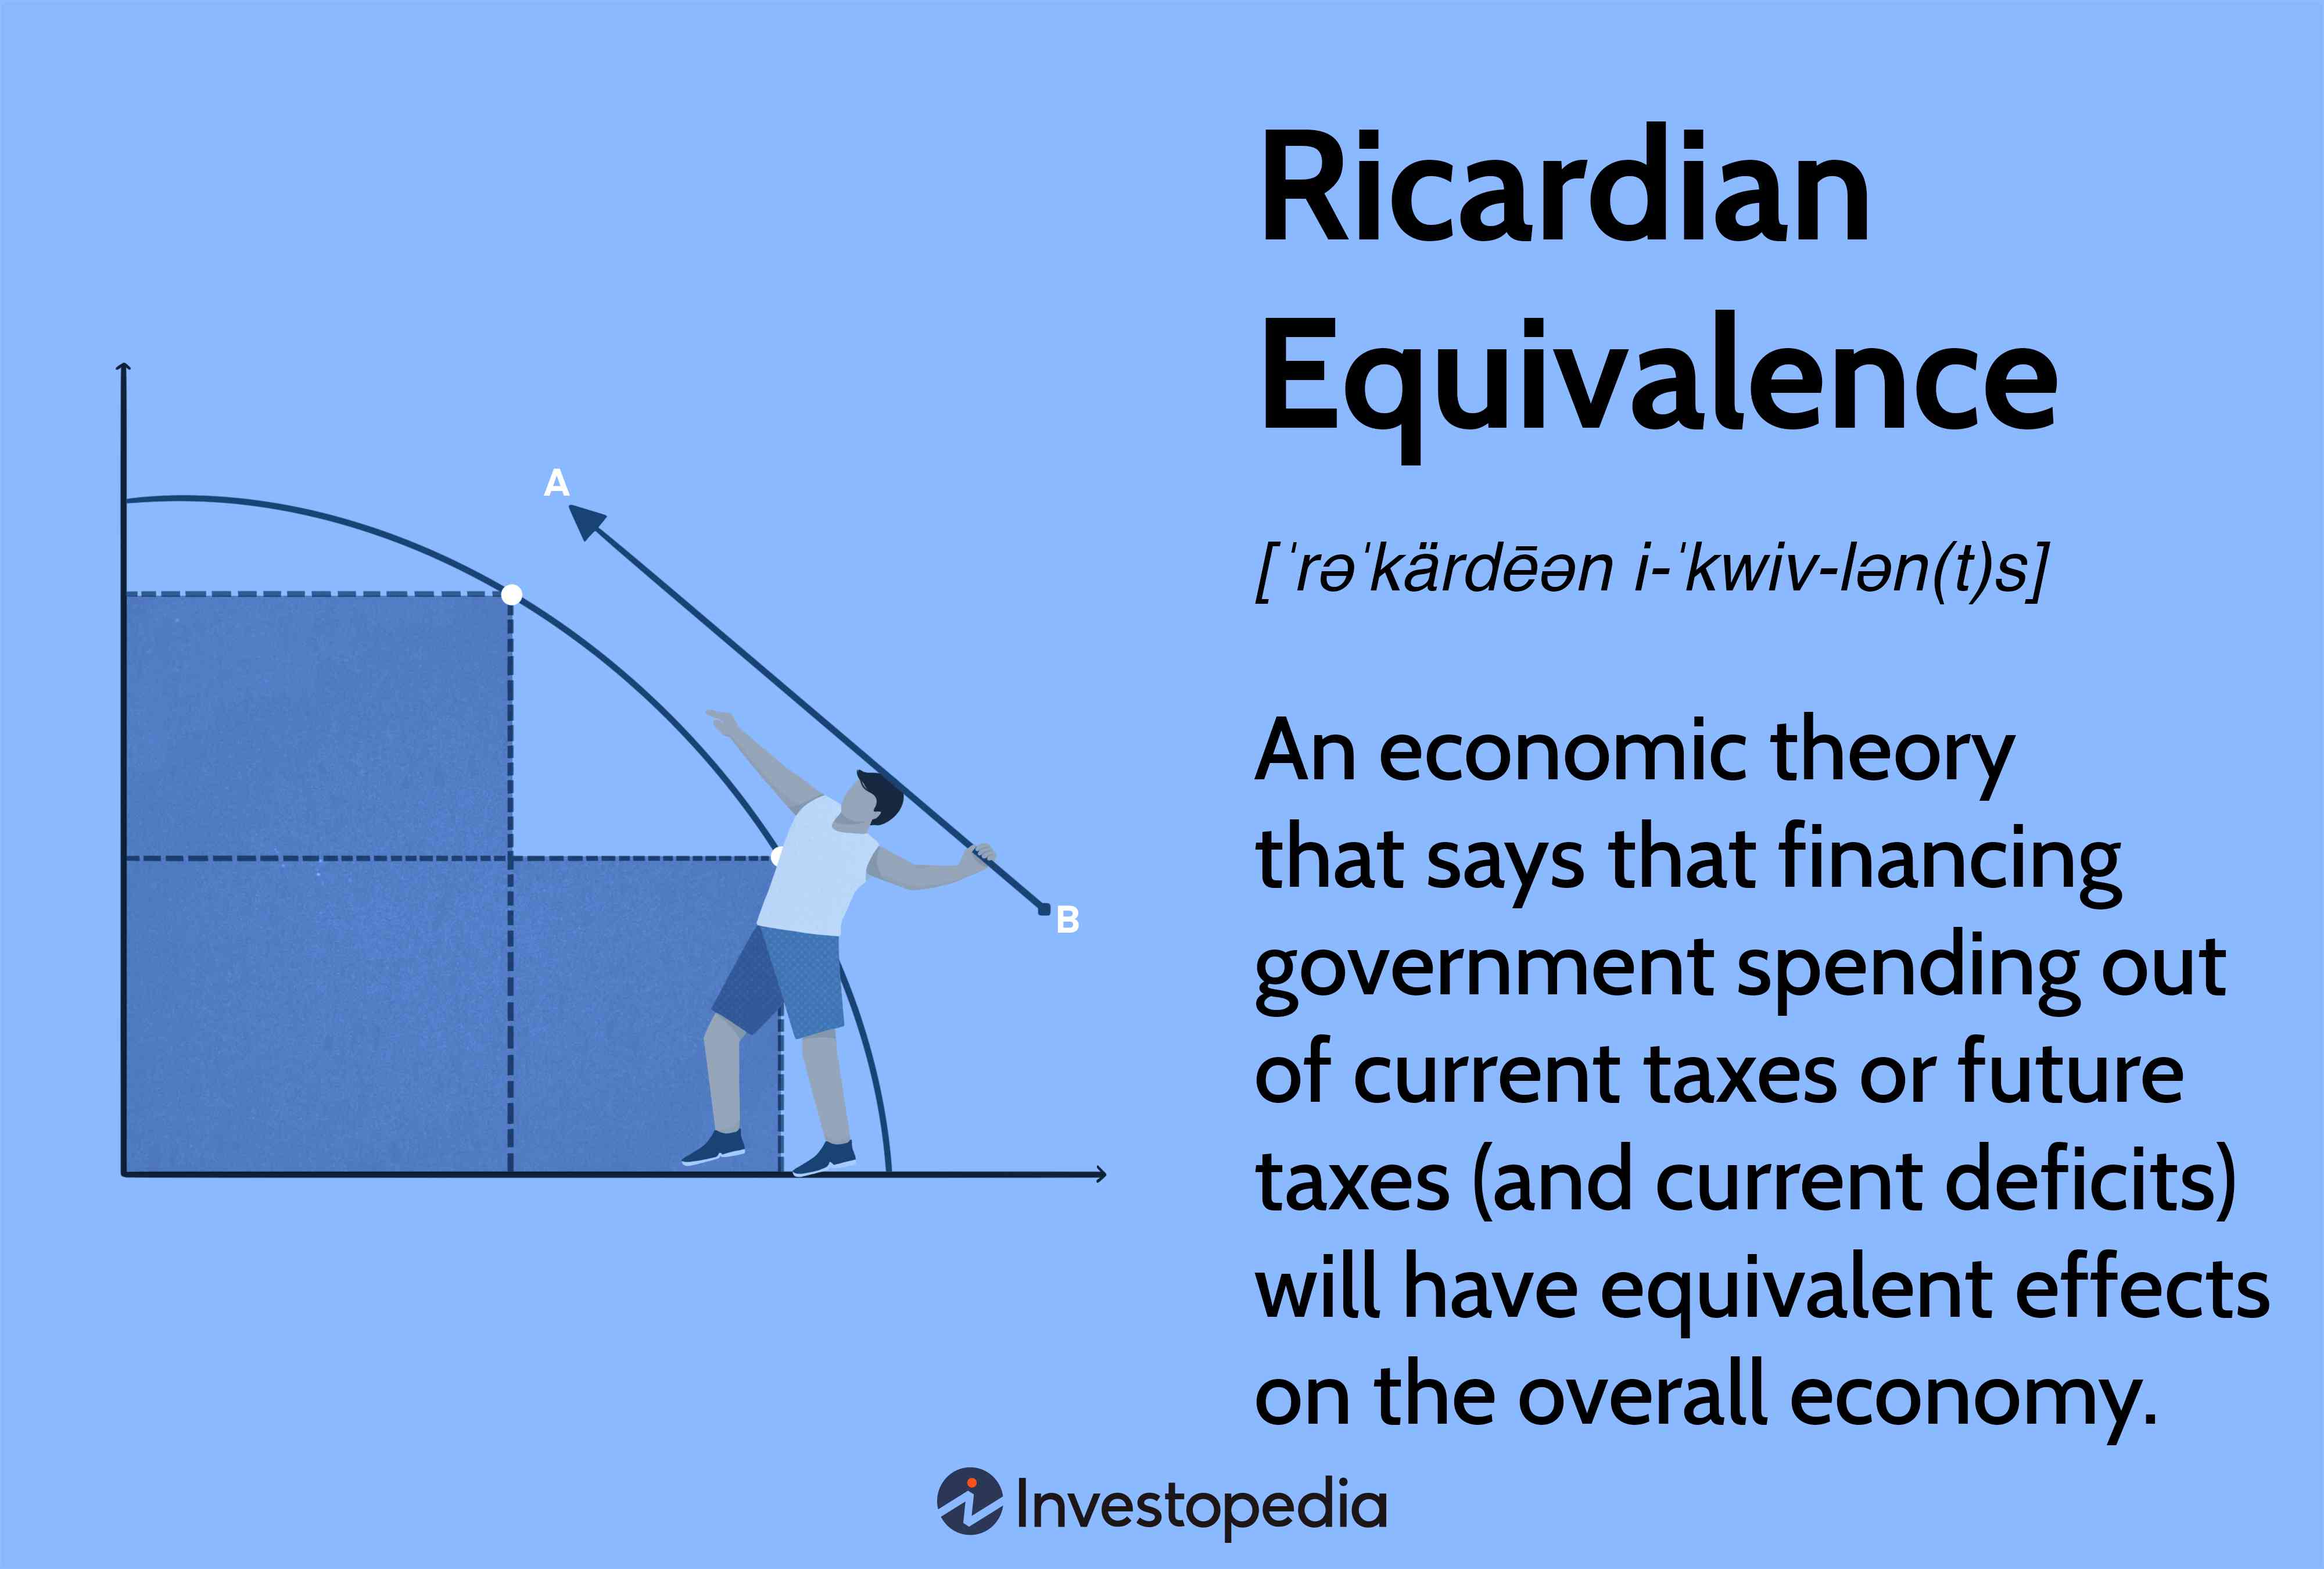 Ricardian Equivalence: An economic theory that says that financing government spending out of current taxes or future taxes (and current deficits) will have equivalent effects on the overall economy.